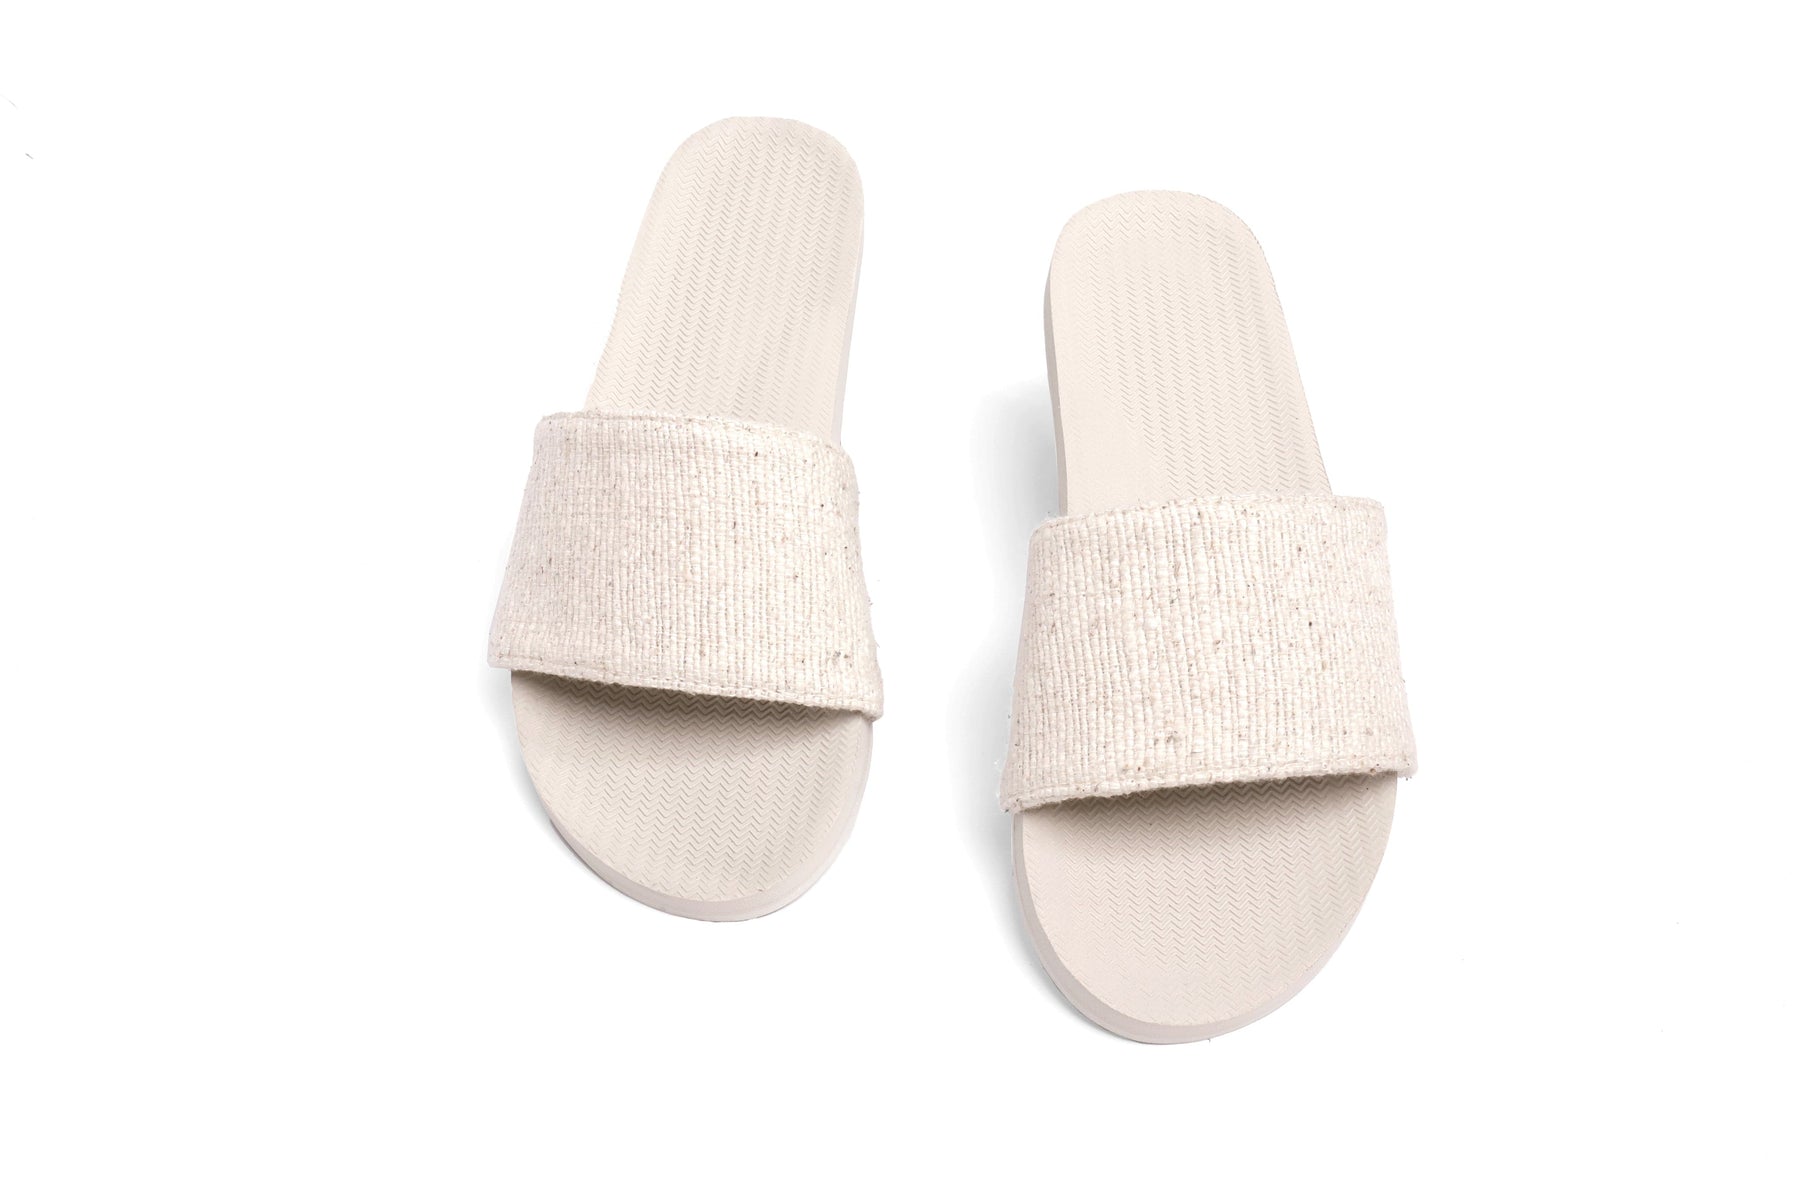 Women's Slide Recycled Pable Straps - Natural/Sea Salt - Indosole